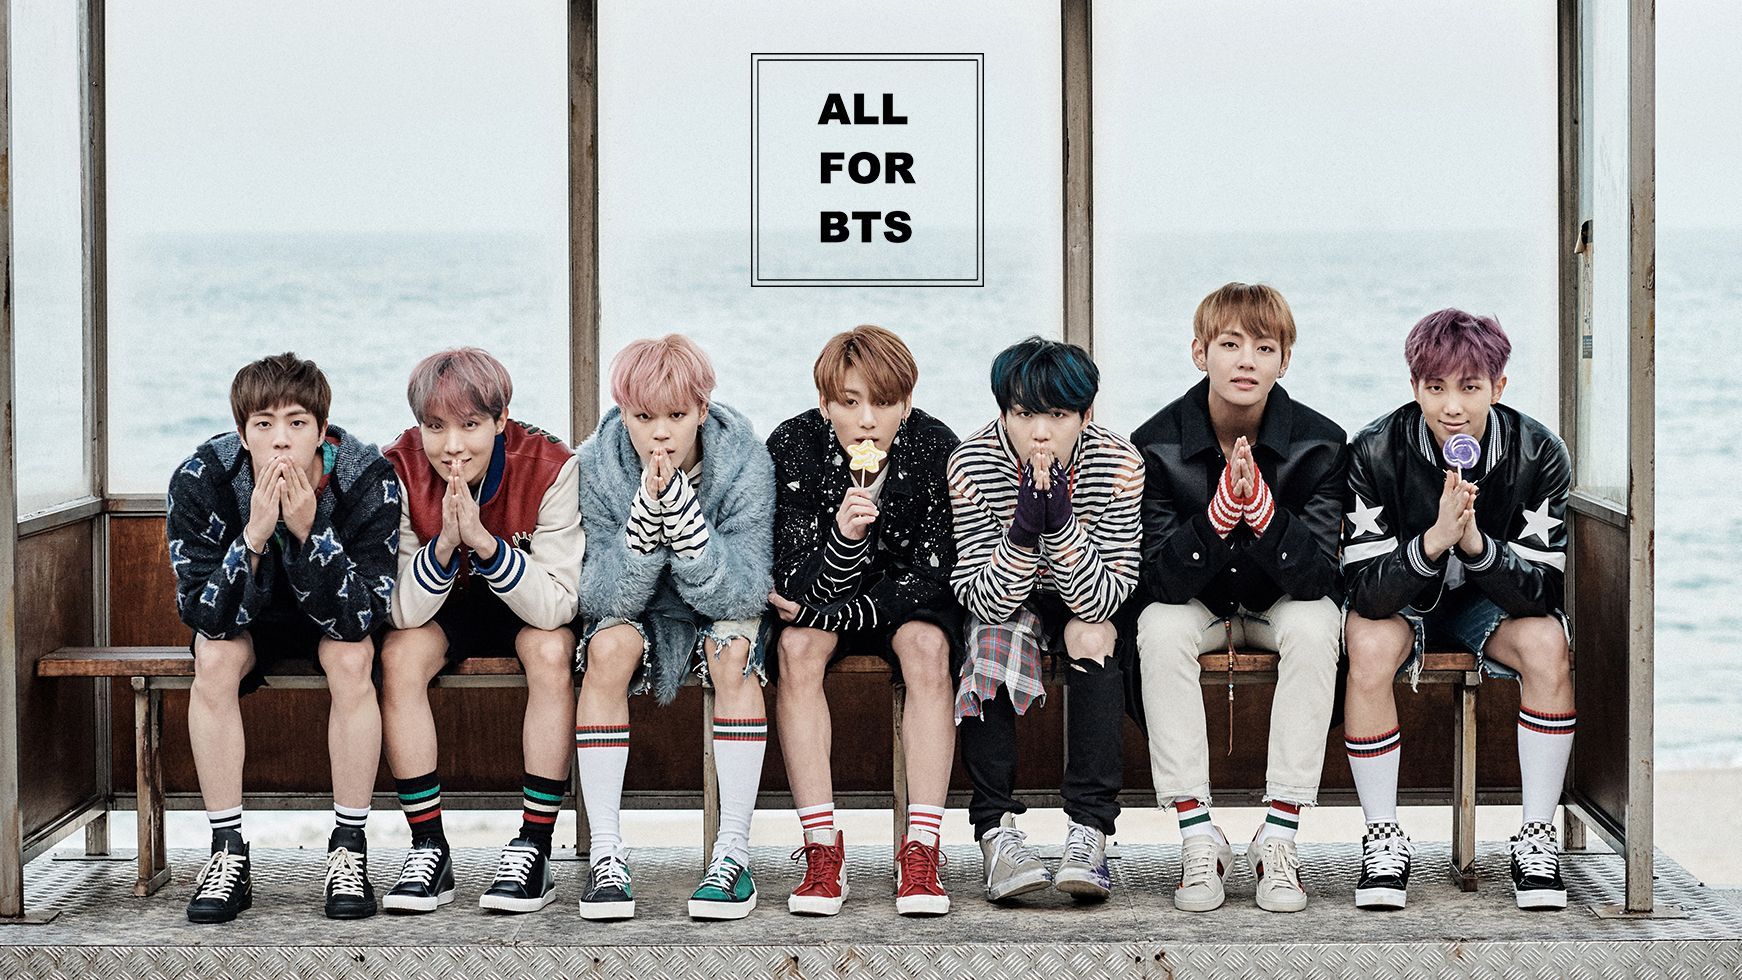 BTS Wallpaper: HD, 4K, 5K for PC and Mobile. Download free